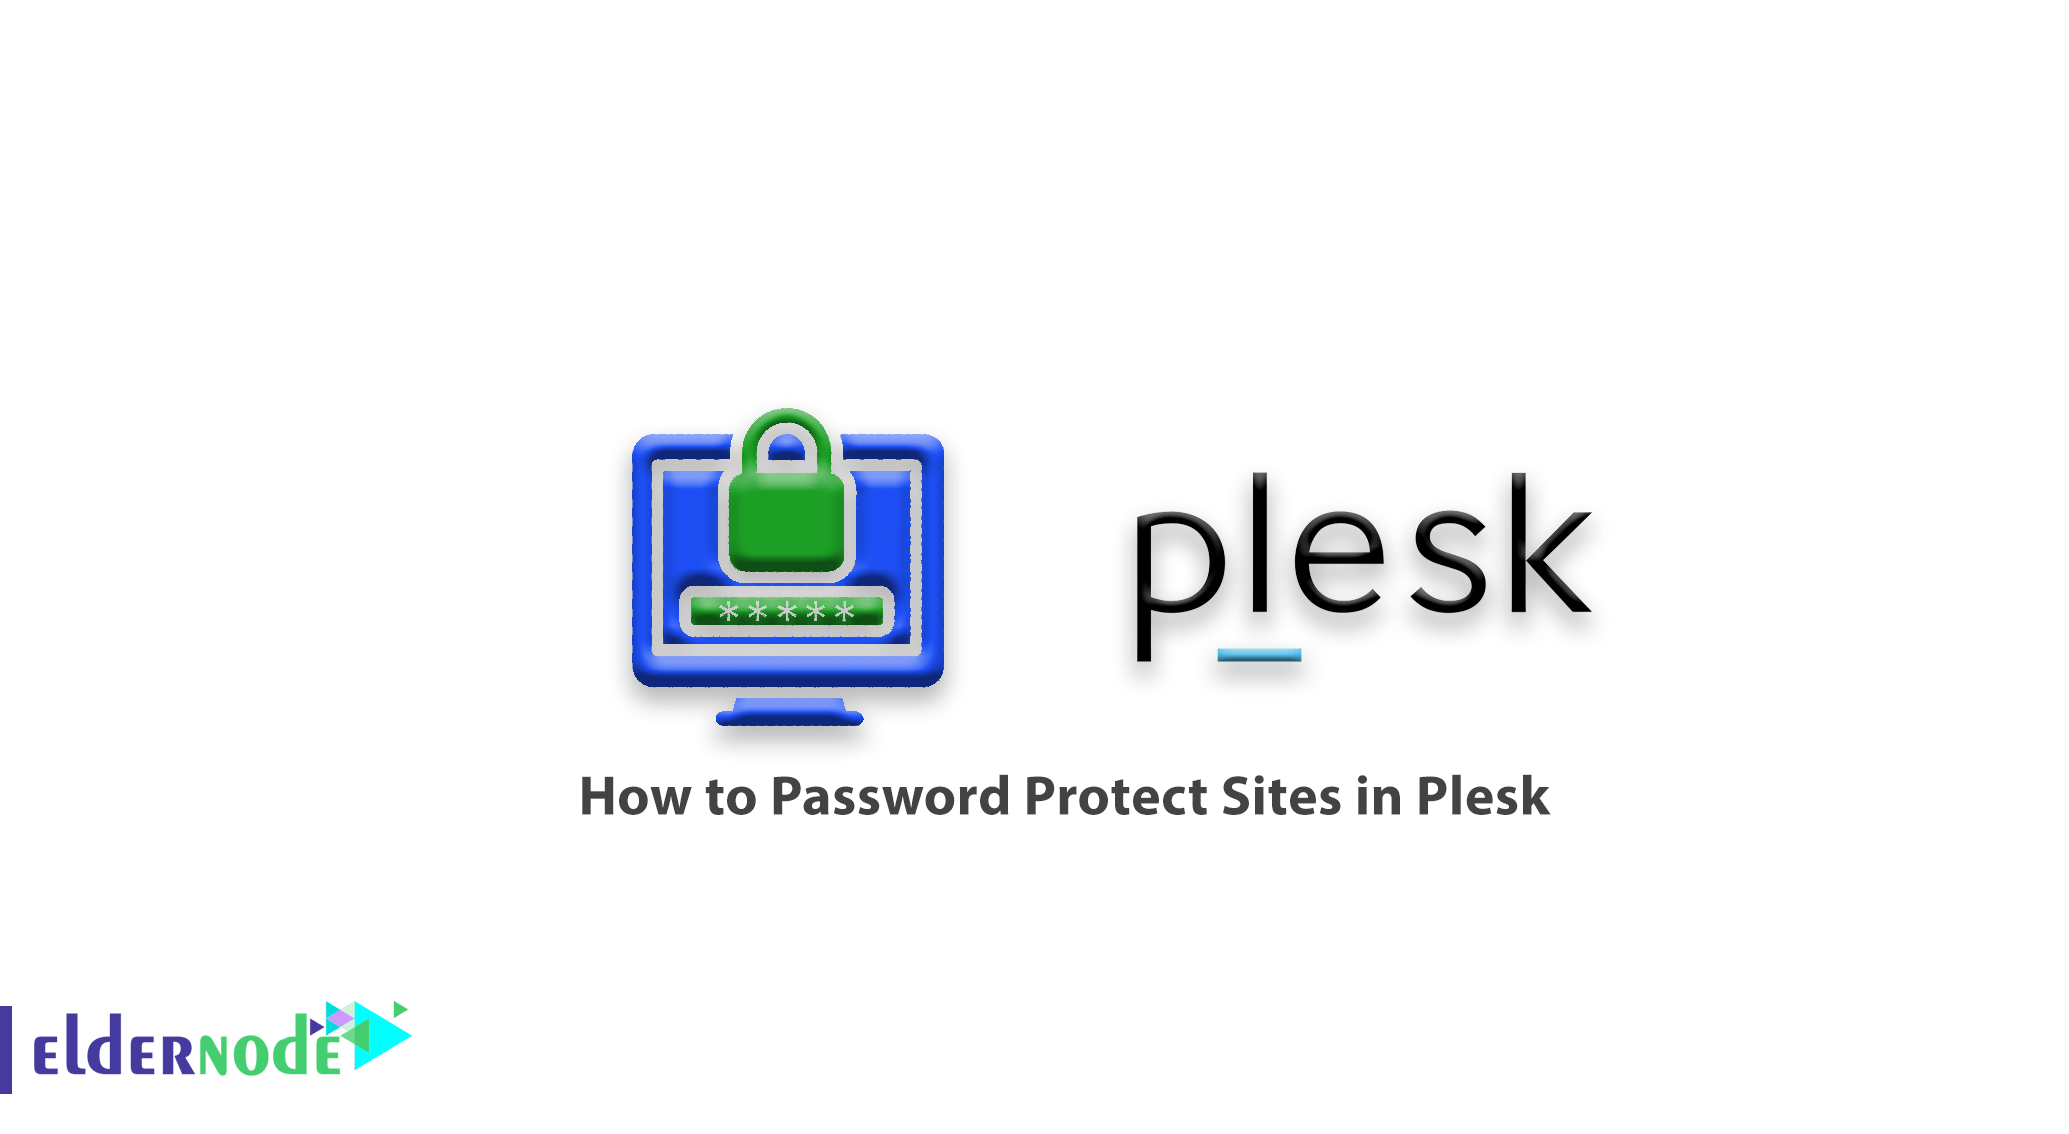 How to Password Protect Sites in Plesk